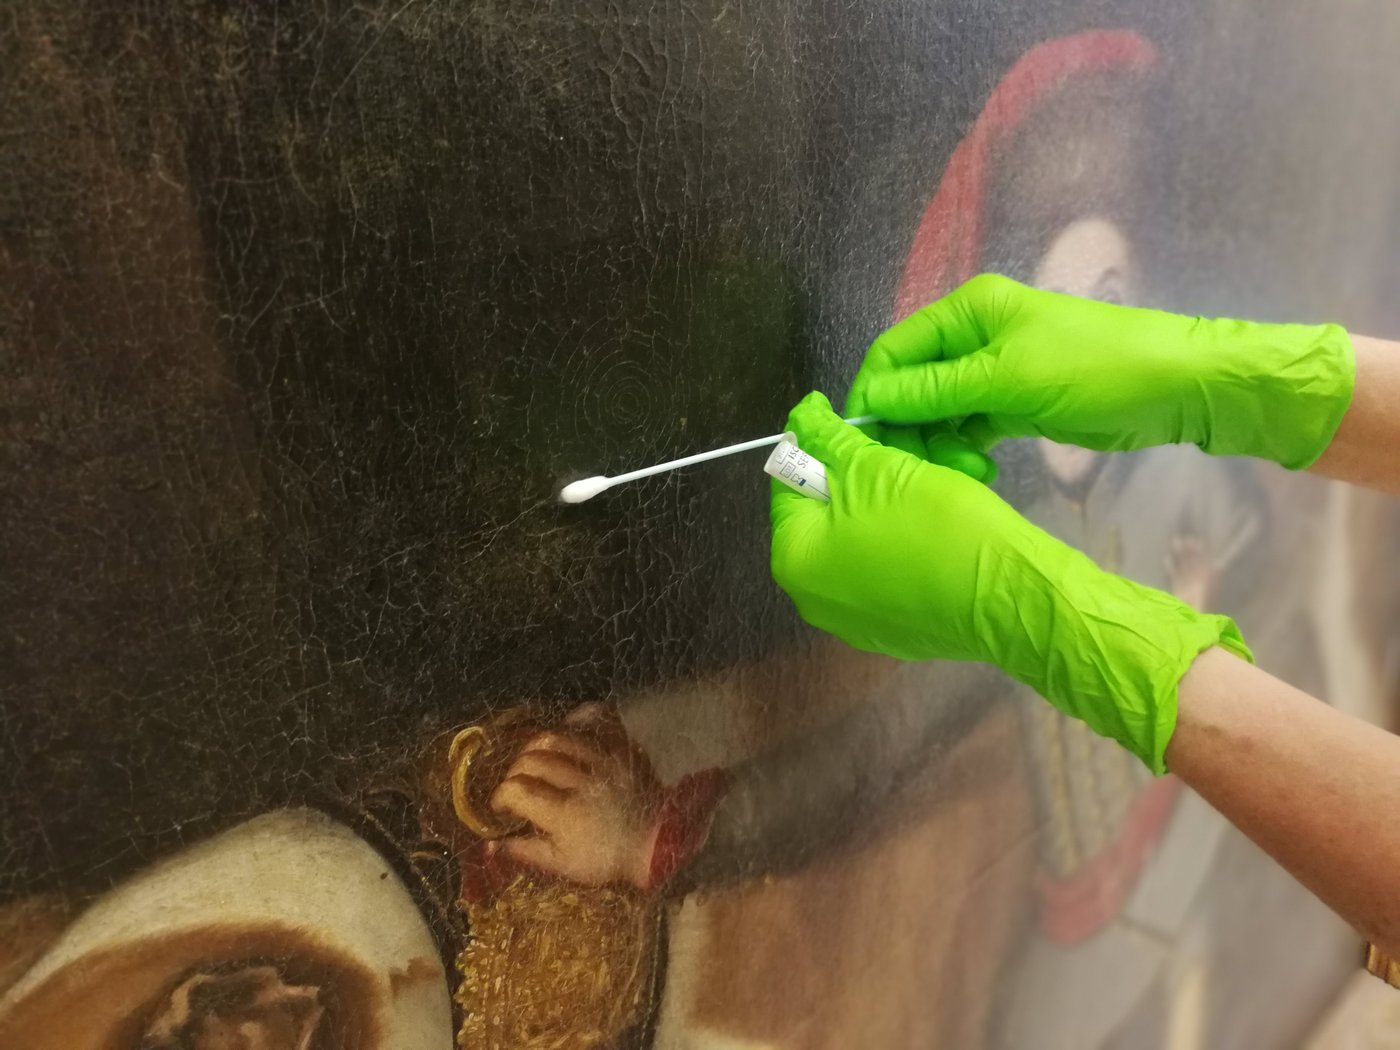 Gloved hands hold a sample tube between thumb and forefinger while simultaneously stroking the surface of an oil painting with a cotton swab.